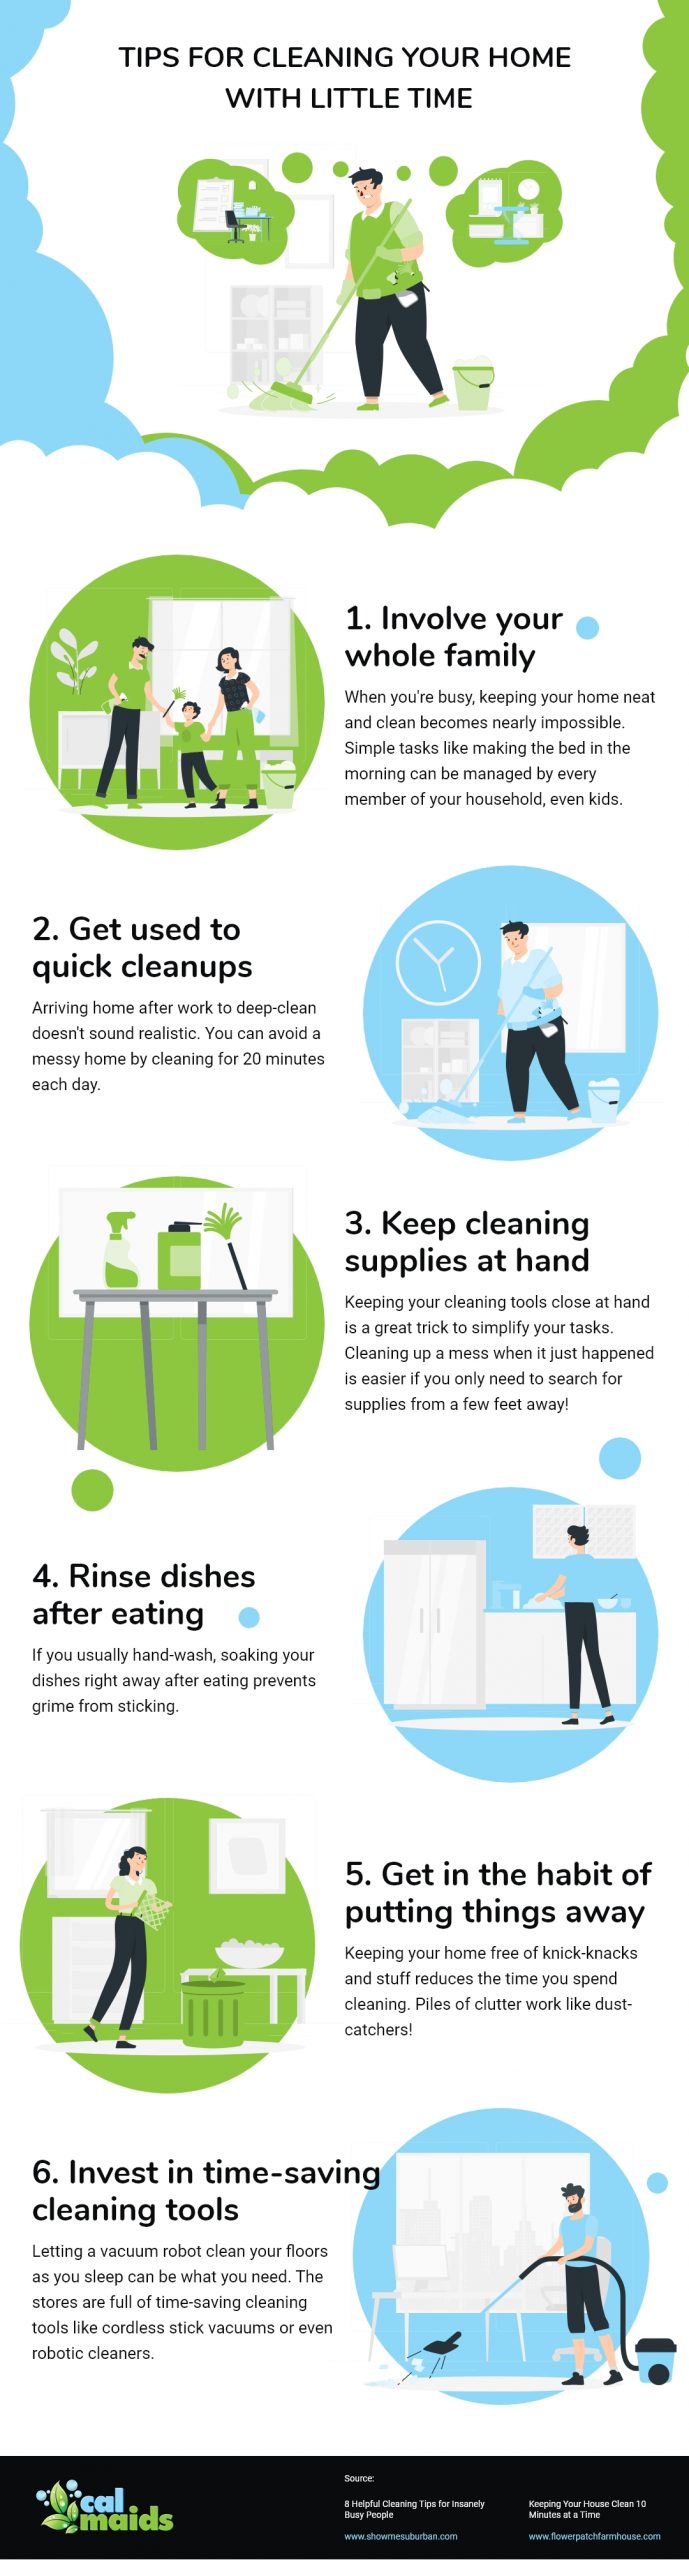 10 MUST KNOW TIPS FOR A CLEAN HOUSE, BIGGEST TIPS TO KEEP A CLEAN HOME